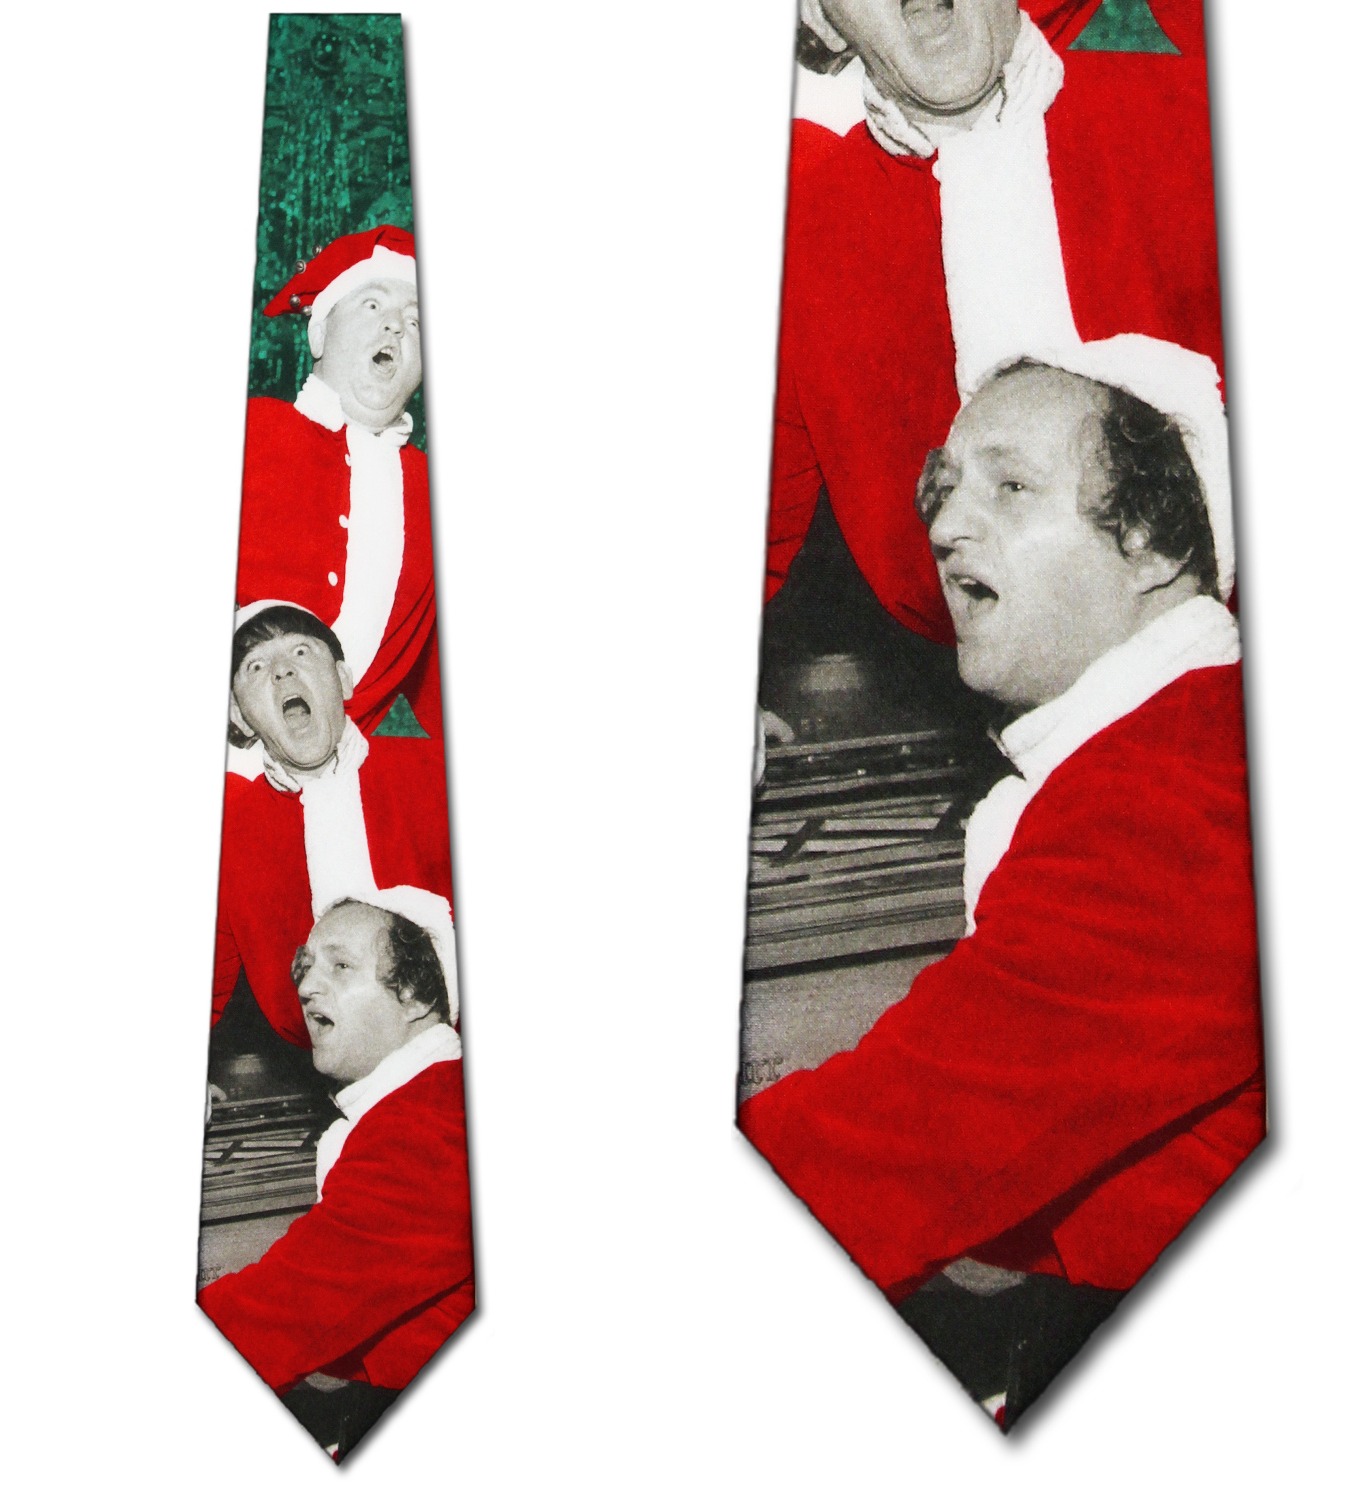 Three Stooges Christmas Necktie Mens Tie by Ralph